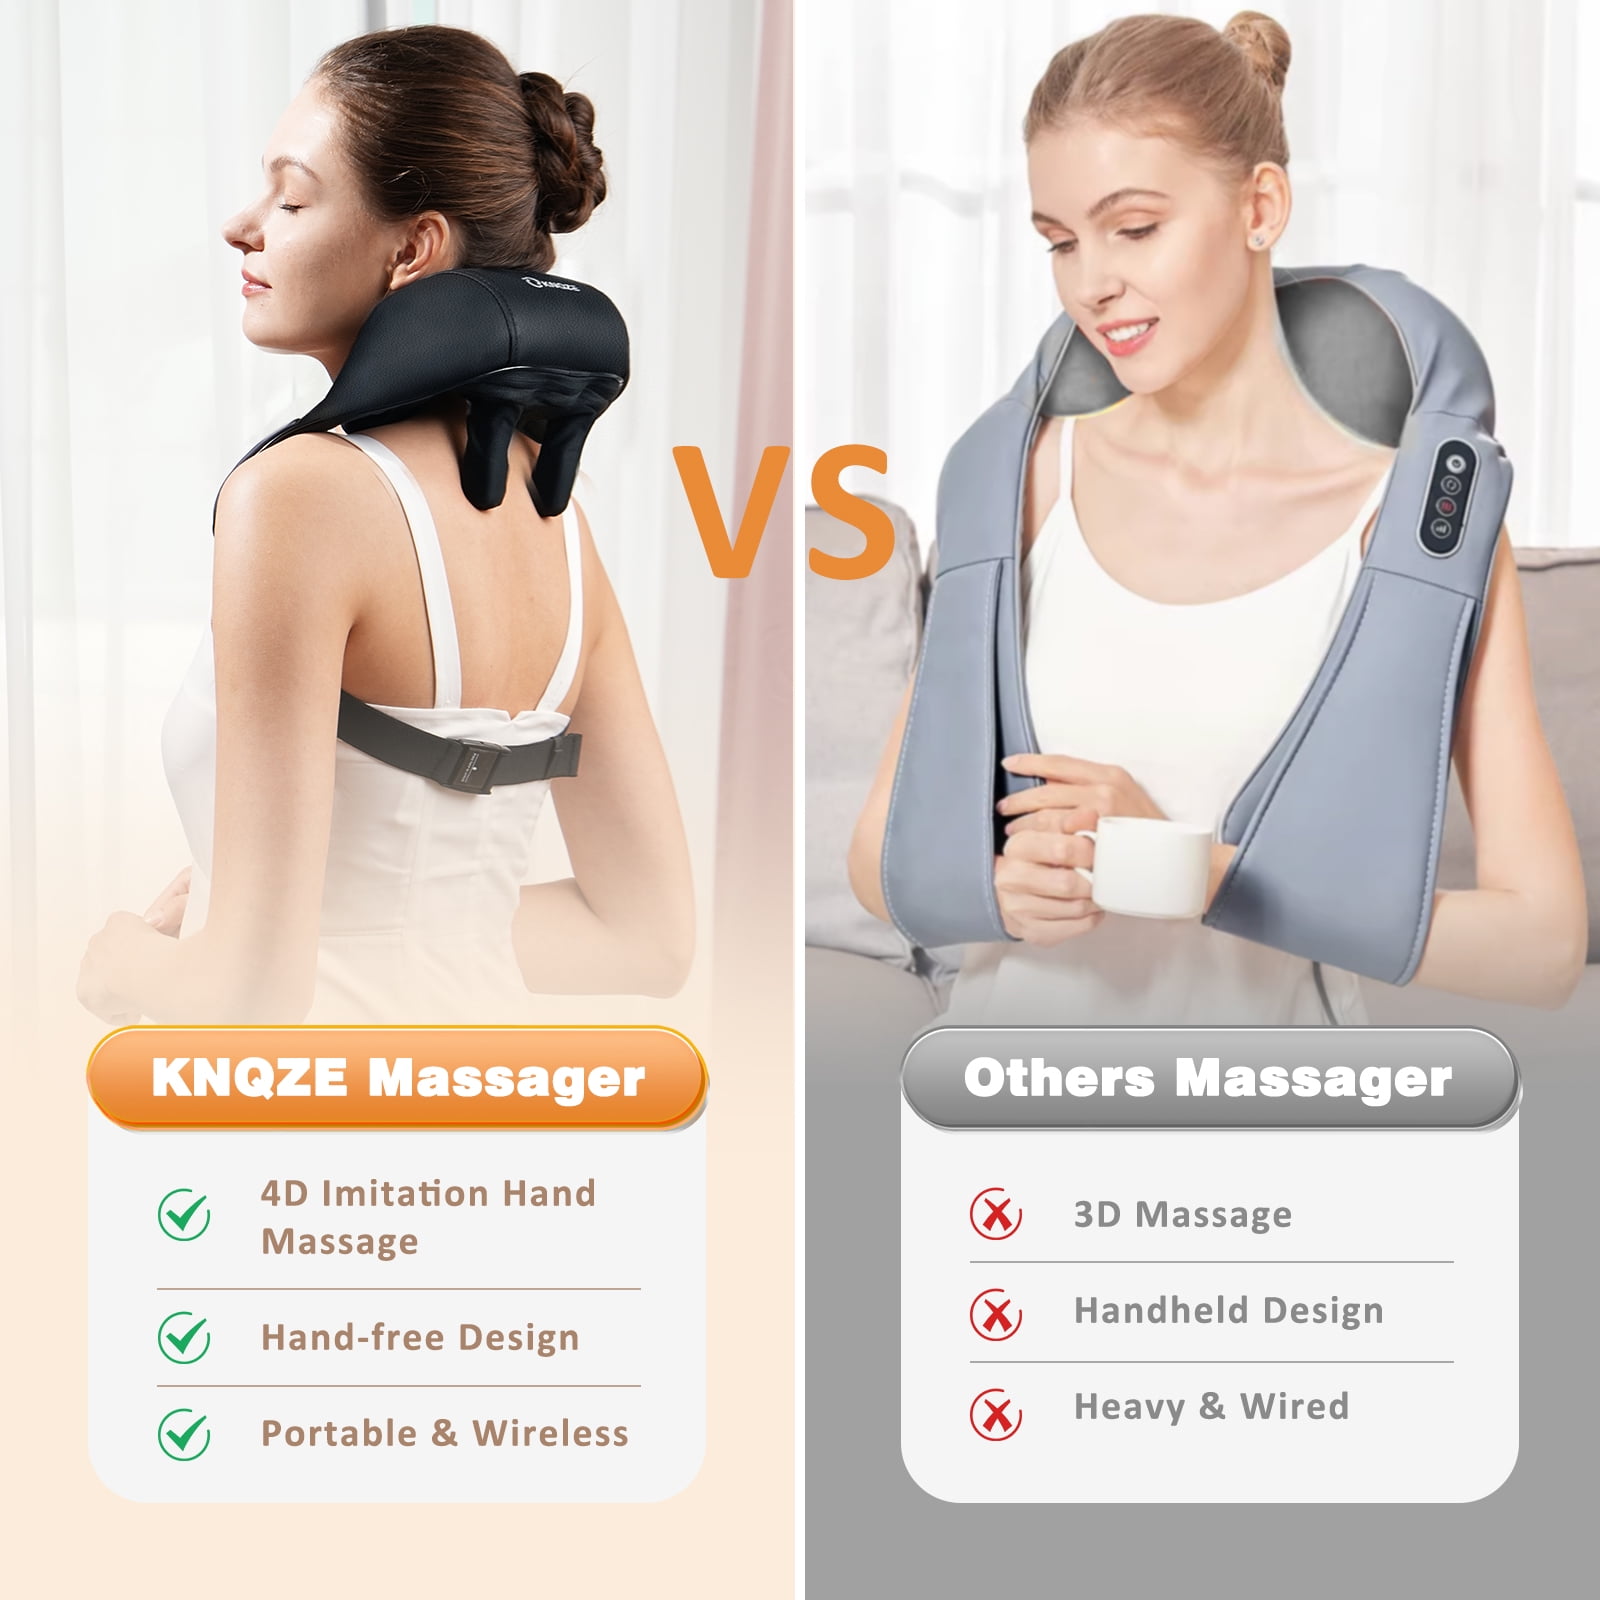 QUINEAR Neck Massager with Heat, Cordless Electric Pulse Neck Massage  Device for Pain Relief & Deep Relaxation QN-033N - QUINEAR Massager